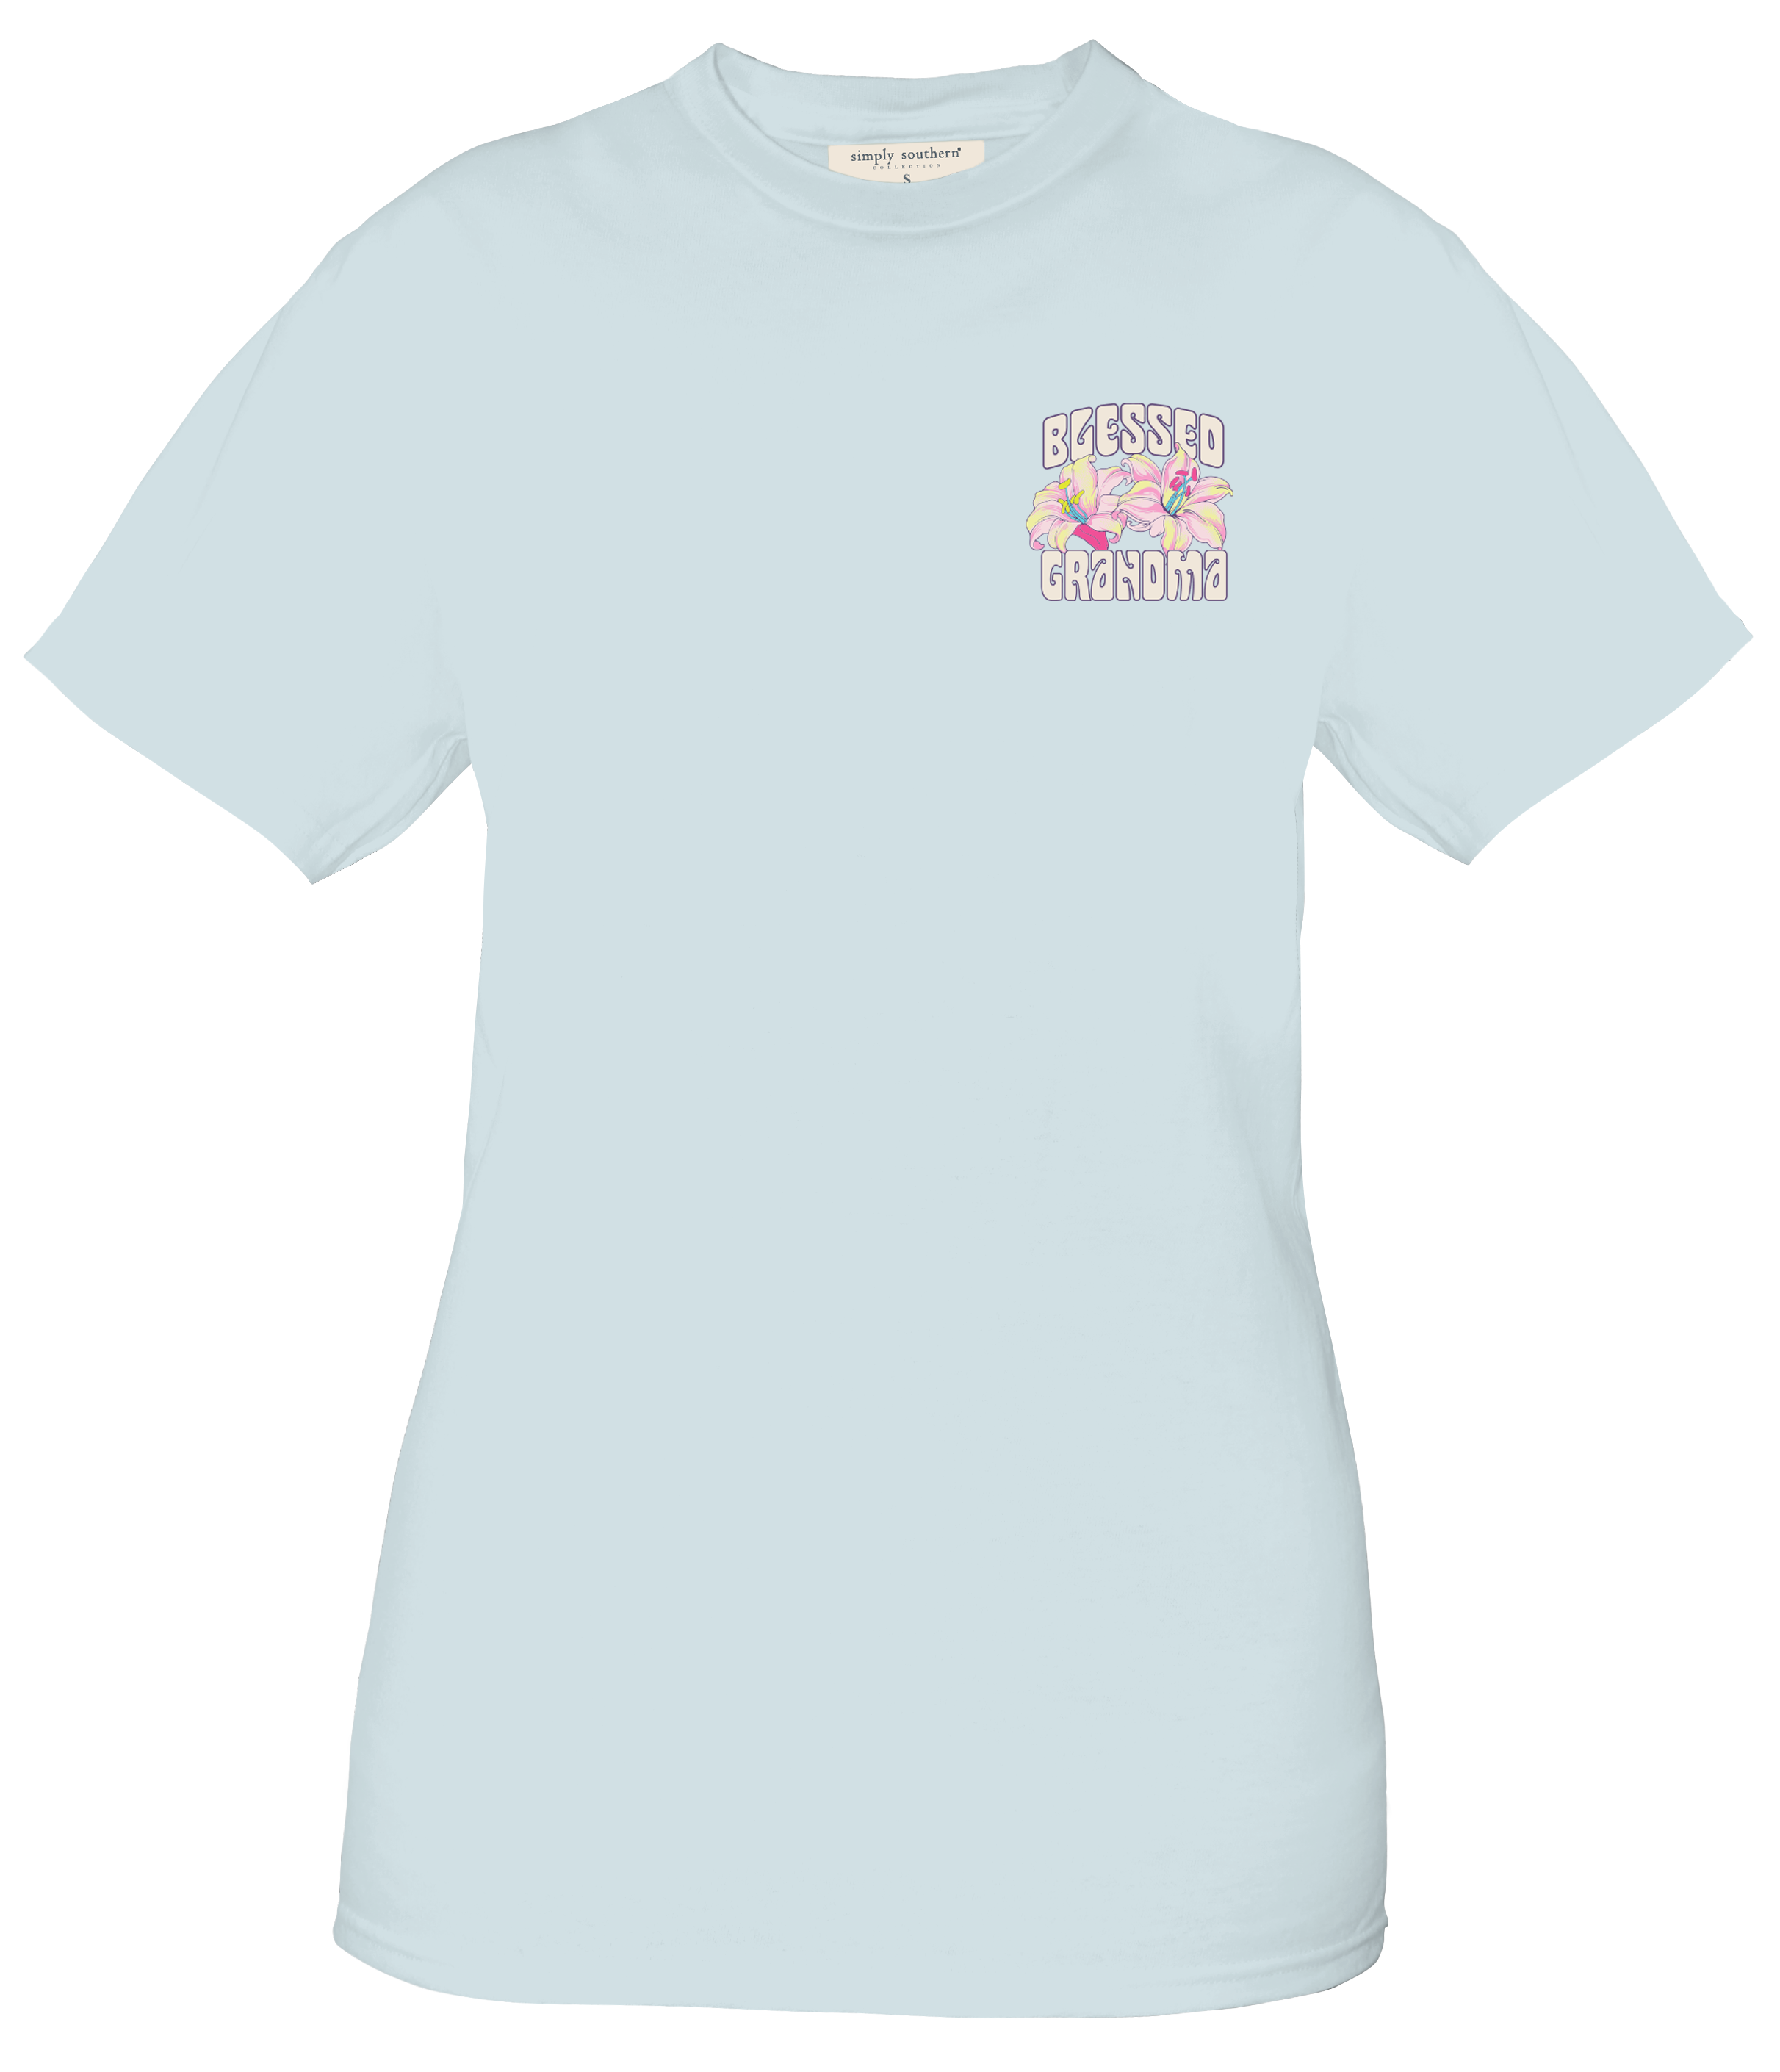 'Blessed Grandma' Butterfly Short Sleeve Tee by Simply Southern